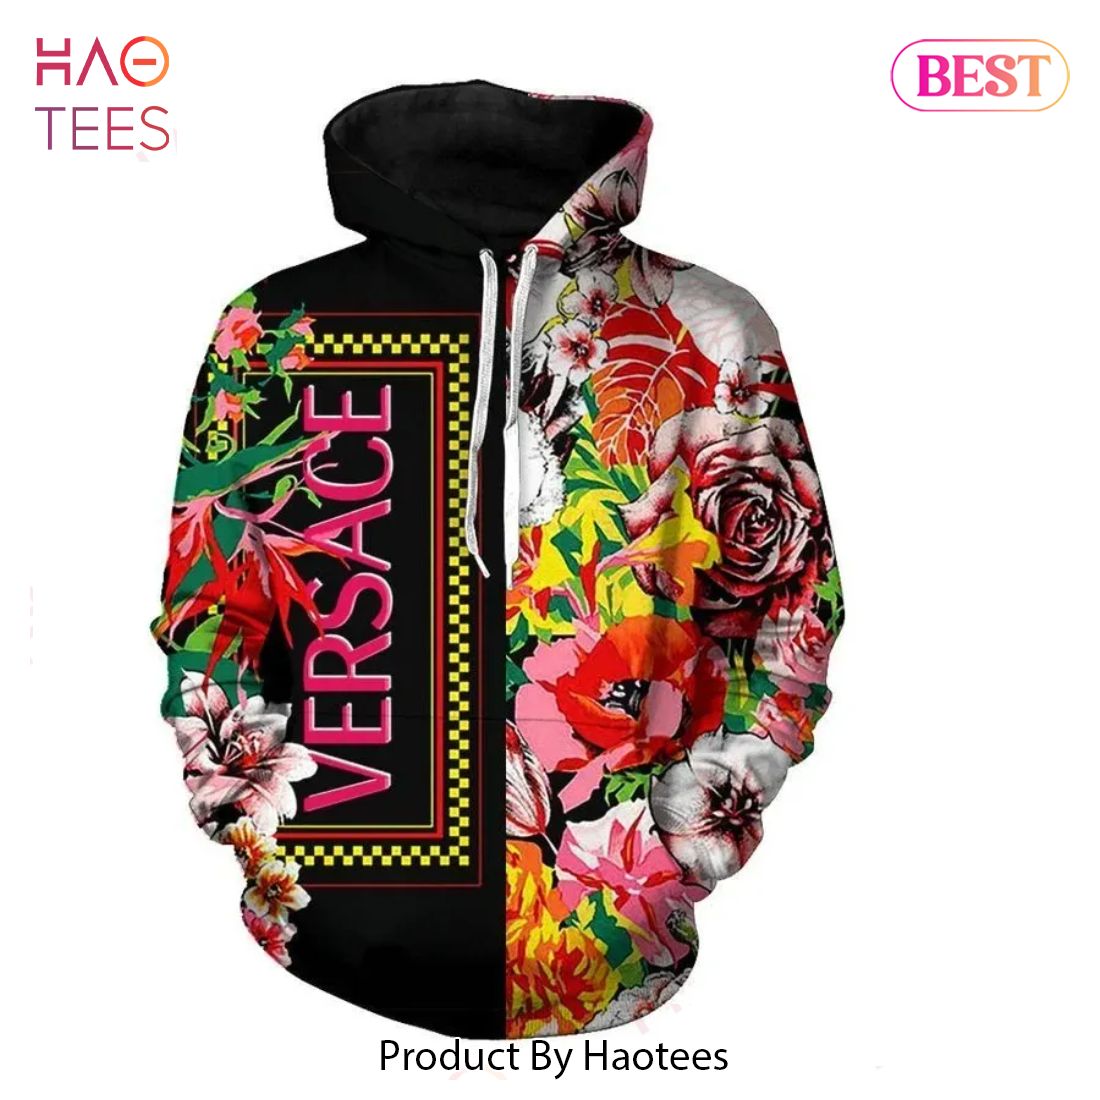 Gianni Versace Flower Unisex Hoodie For Men Women Luxury Brand Clothing Clothes Outfit